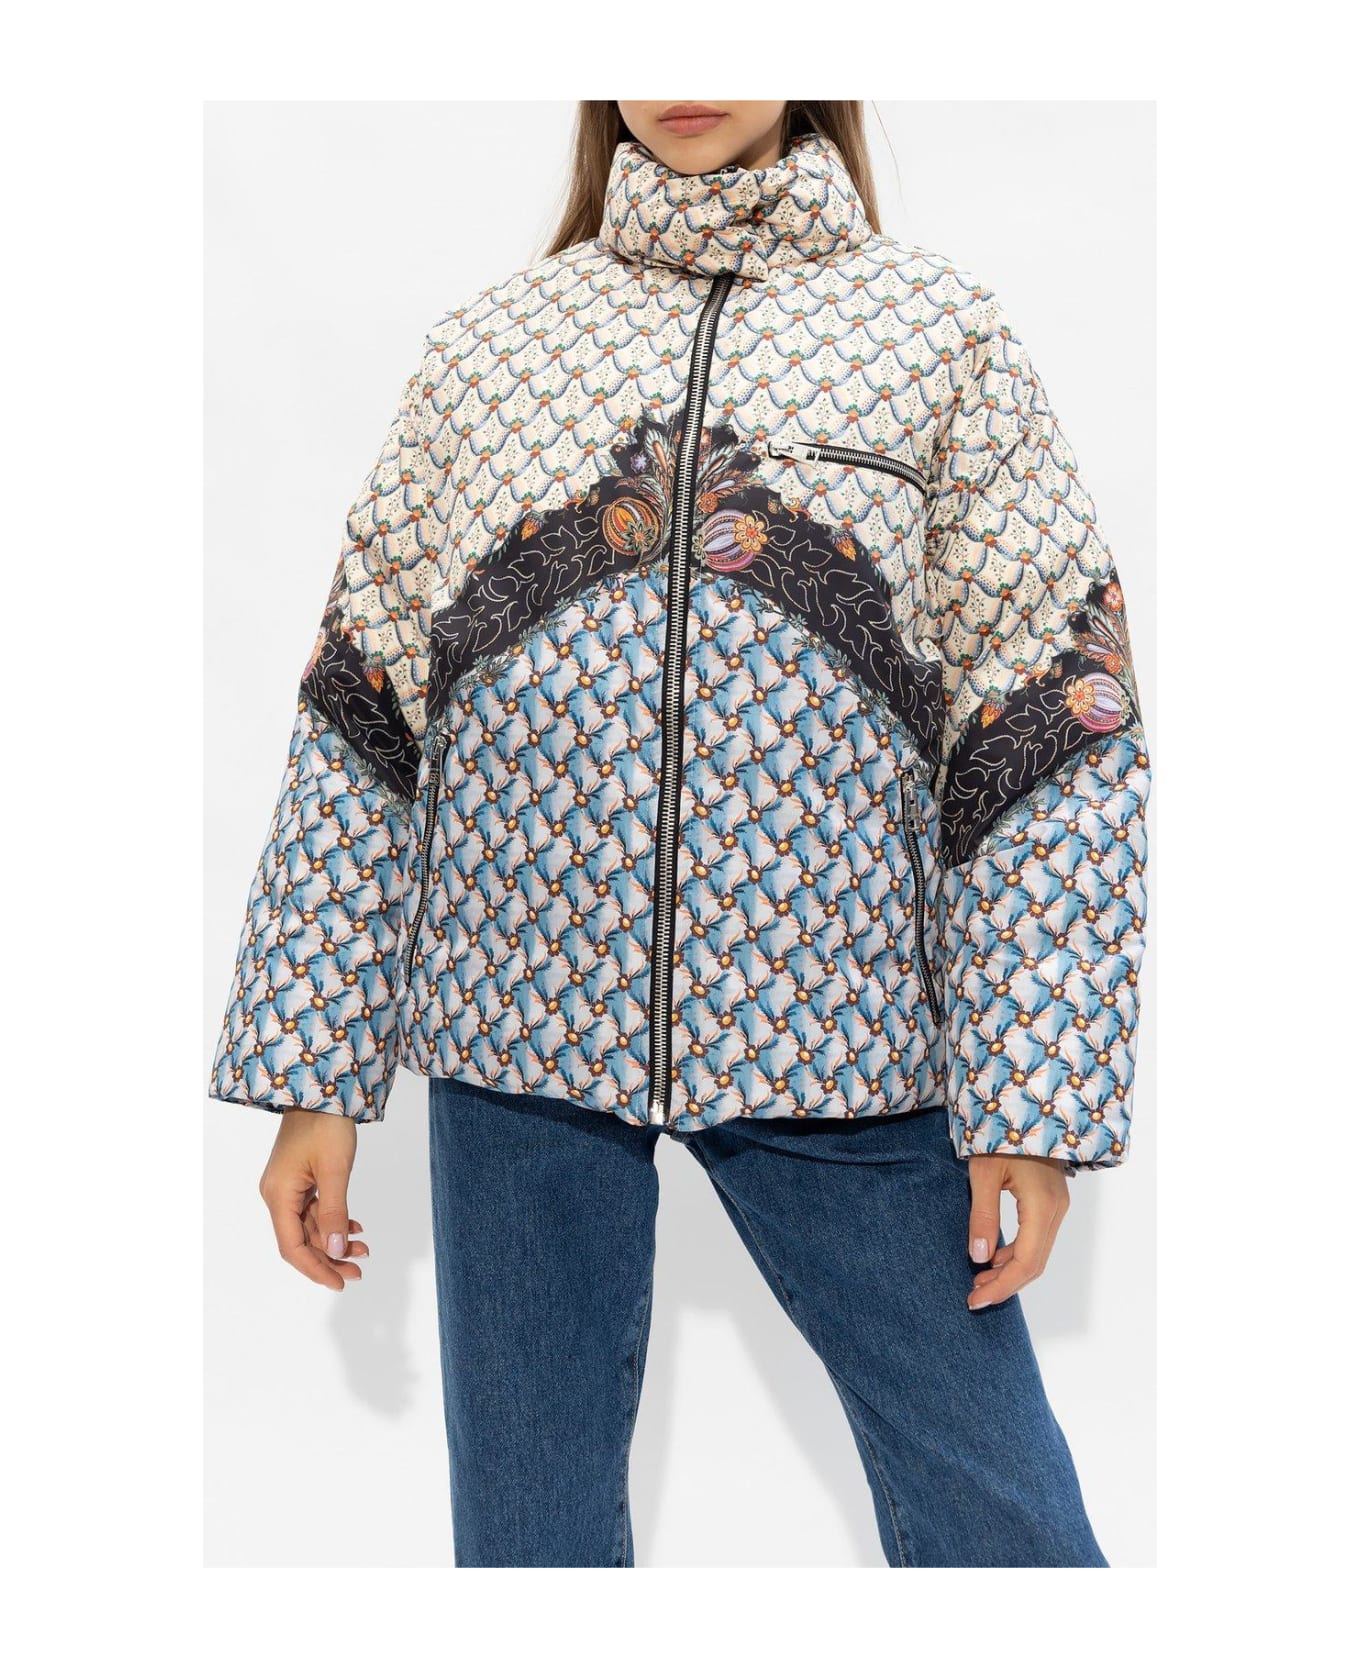 Etro Patterned Zip-up Down Jacket